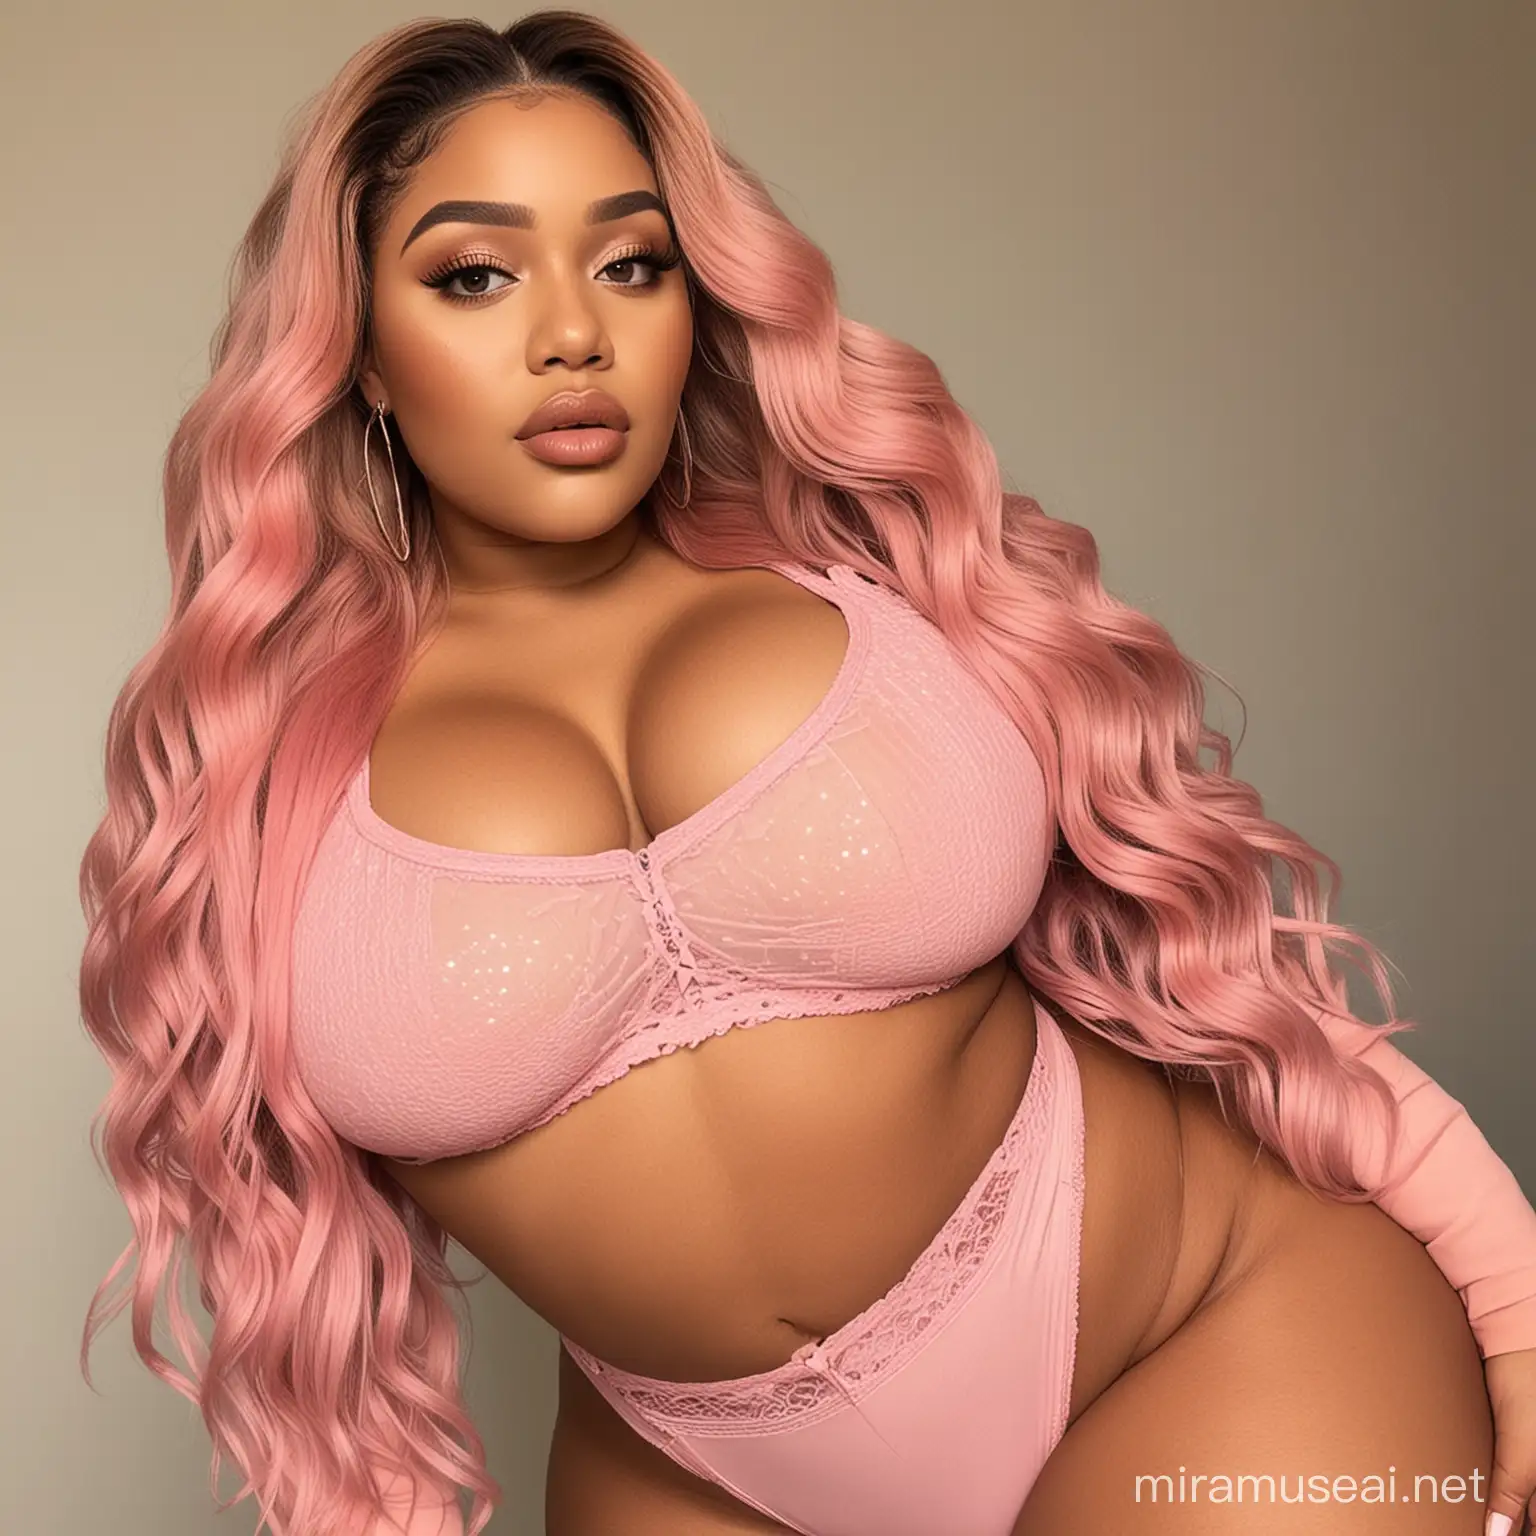 Thick South African Woman with Straight Brown Lace Front Weave in Pink Thirst Trap